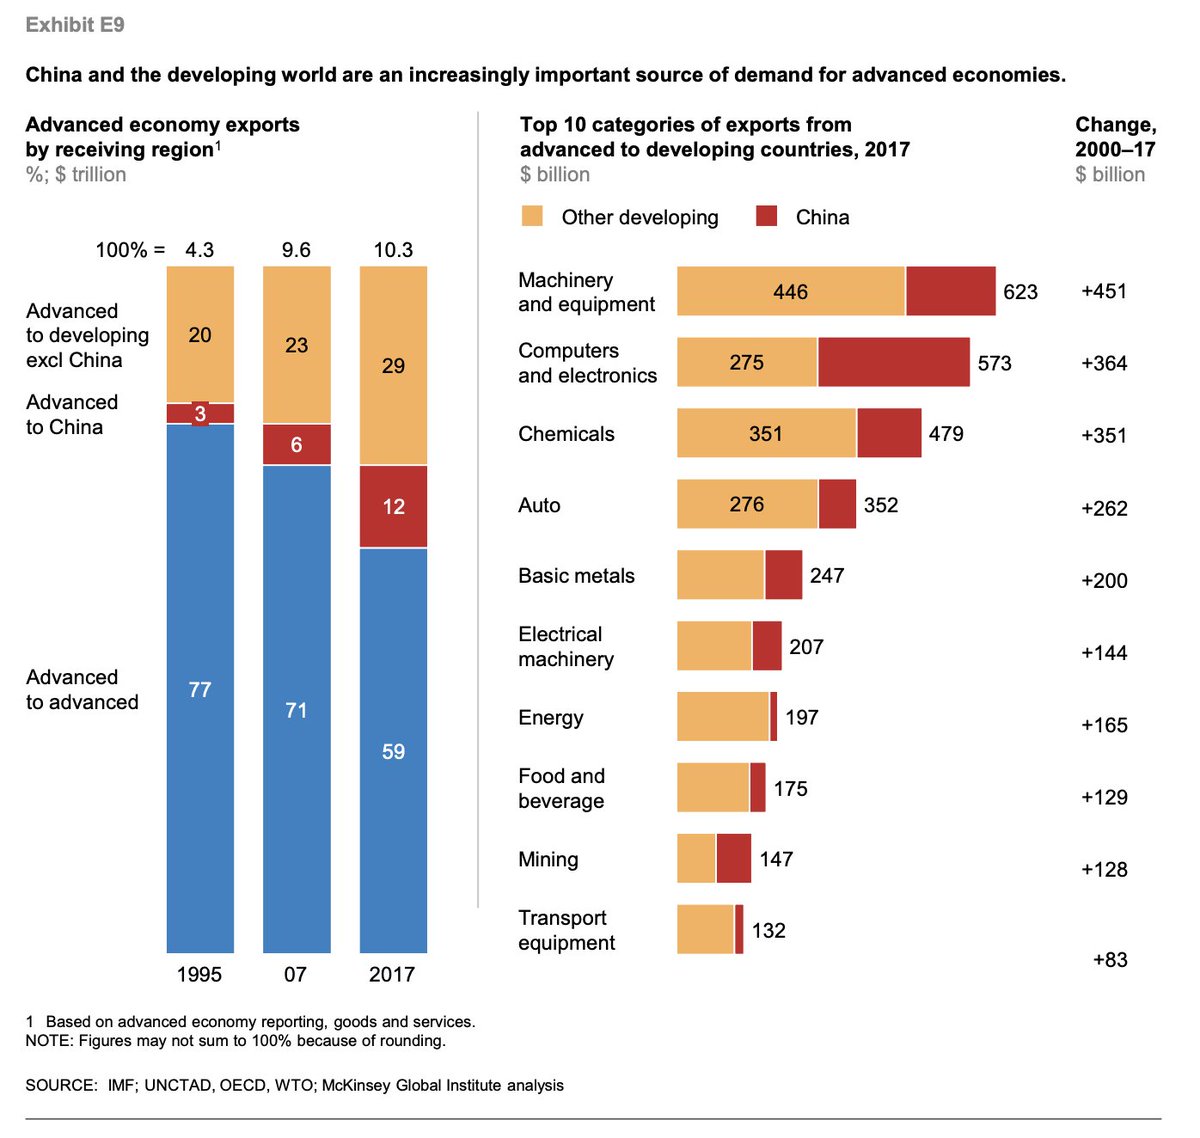 Some things I picked up along the way... Companies want to be wherever they can best tap into demand for their products. Which means the pull of EMs/China is strongh/t McKinsey Global Institute / Susan Lund  https://www.mckinsey.com/~/media/McKinsey/Featured%20Insights/Innovation/Globalization%20in%20transition%20The%20future%20of%20trade%20and%20value%20chains/MGI-Globalization%20in%20transition-The-future-of-trade-and-value-chains-Full-report.ashx